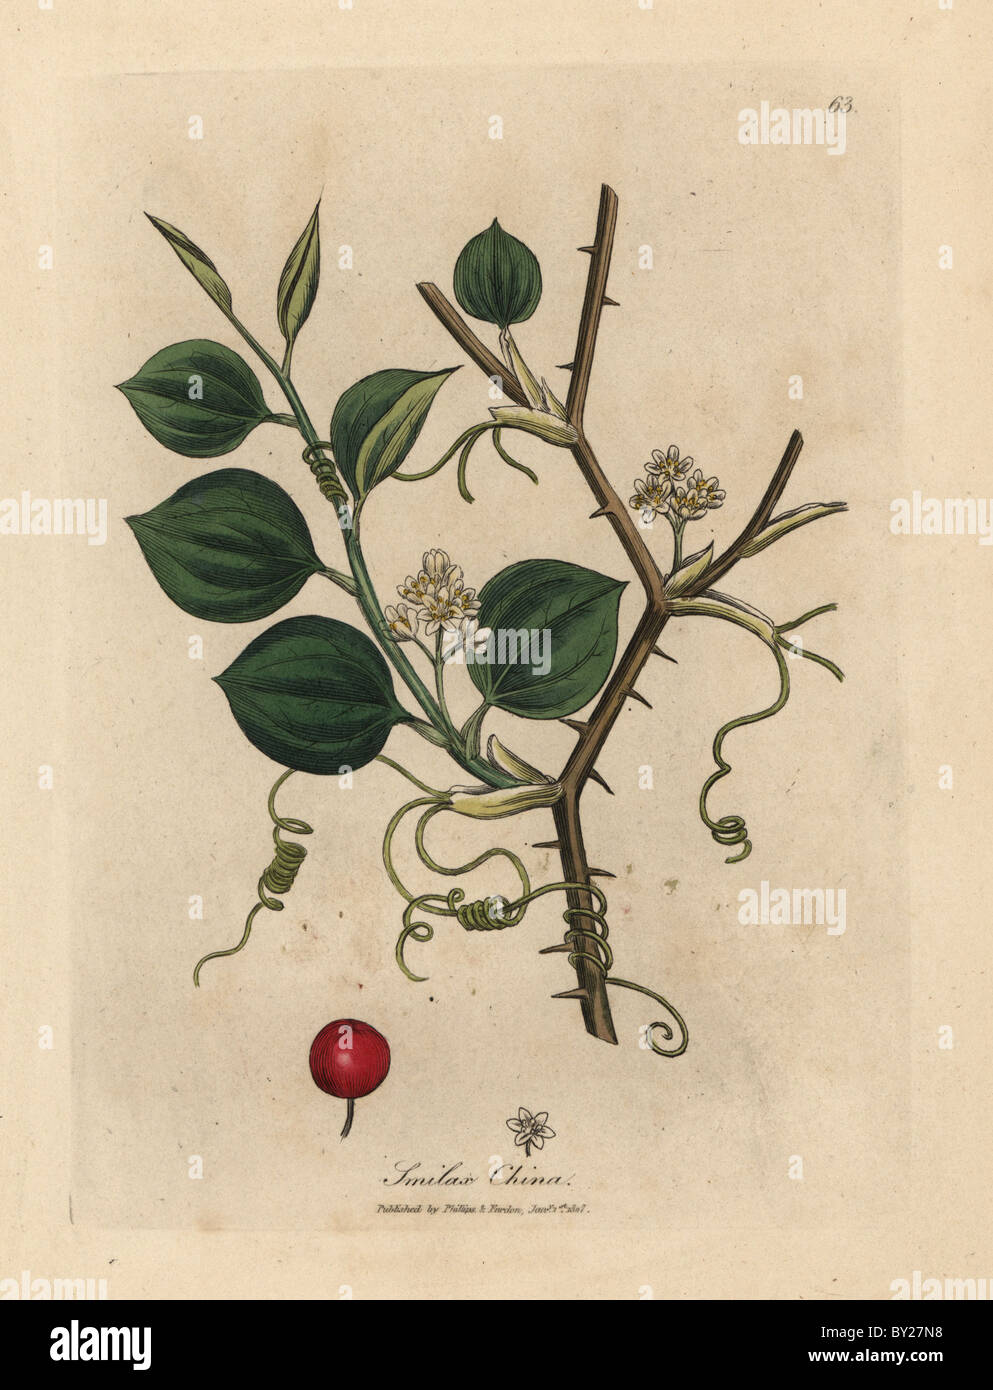 White flowers, tendrils and red berry of Chinese smilax, Smilax china. Stock Photo